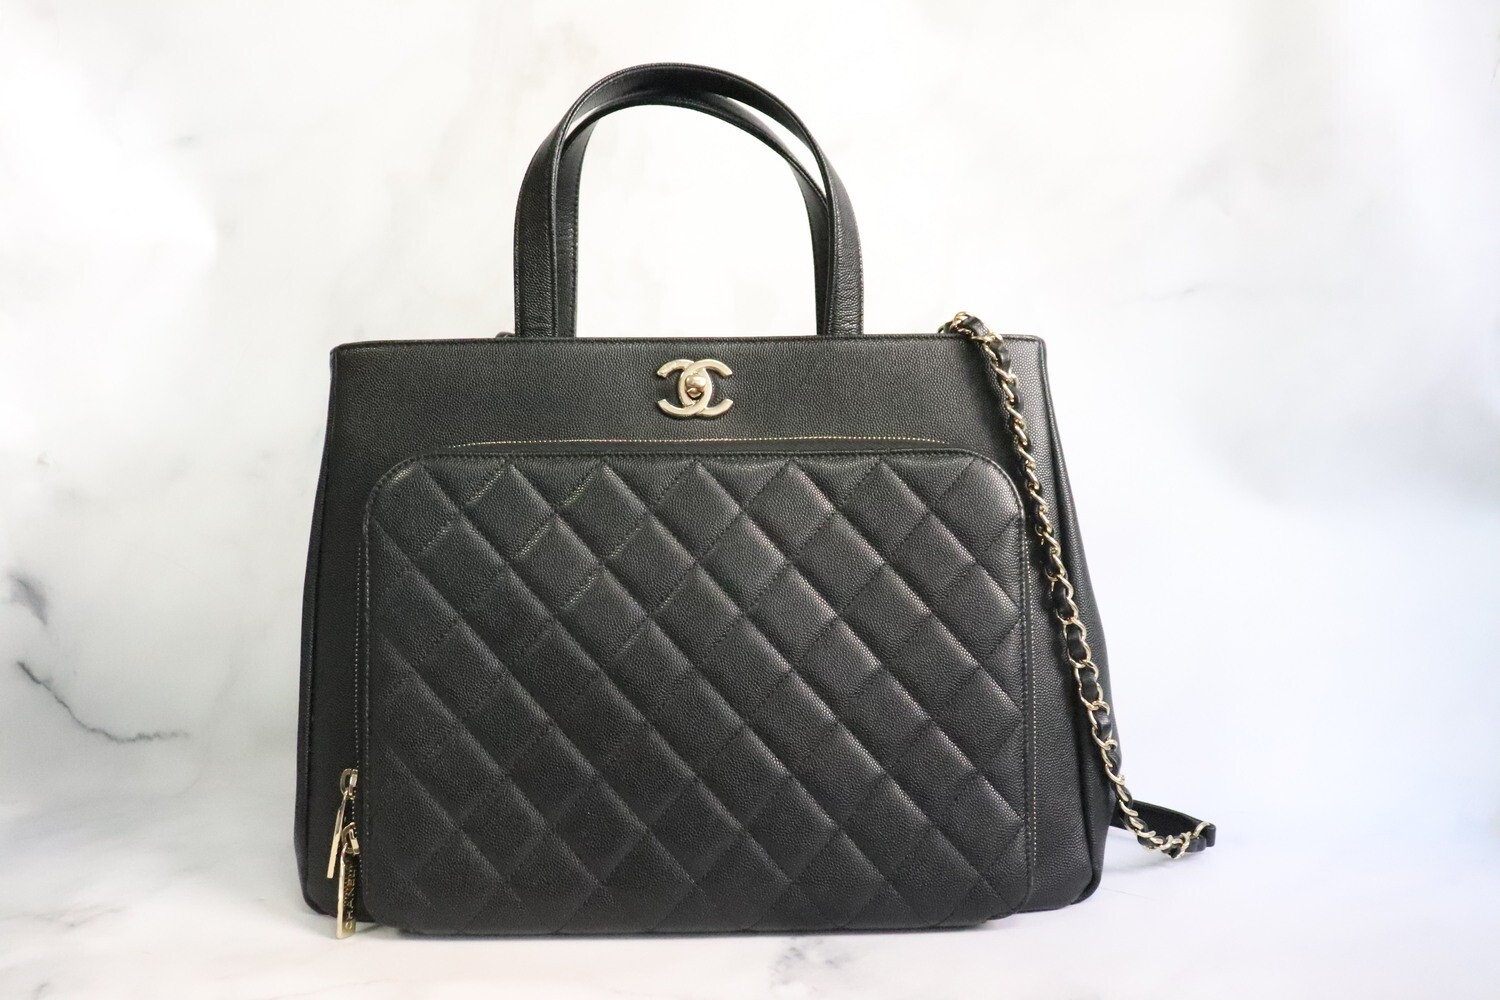 Chanel Business Affinity Tote Bag, Black Caviar Leather, Gold